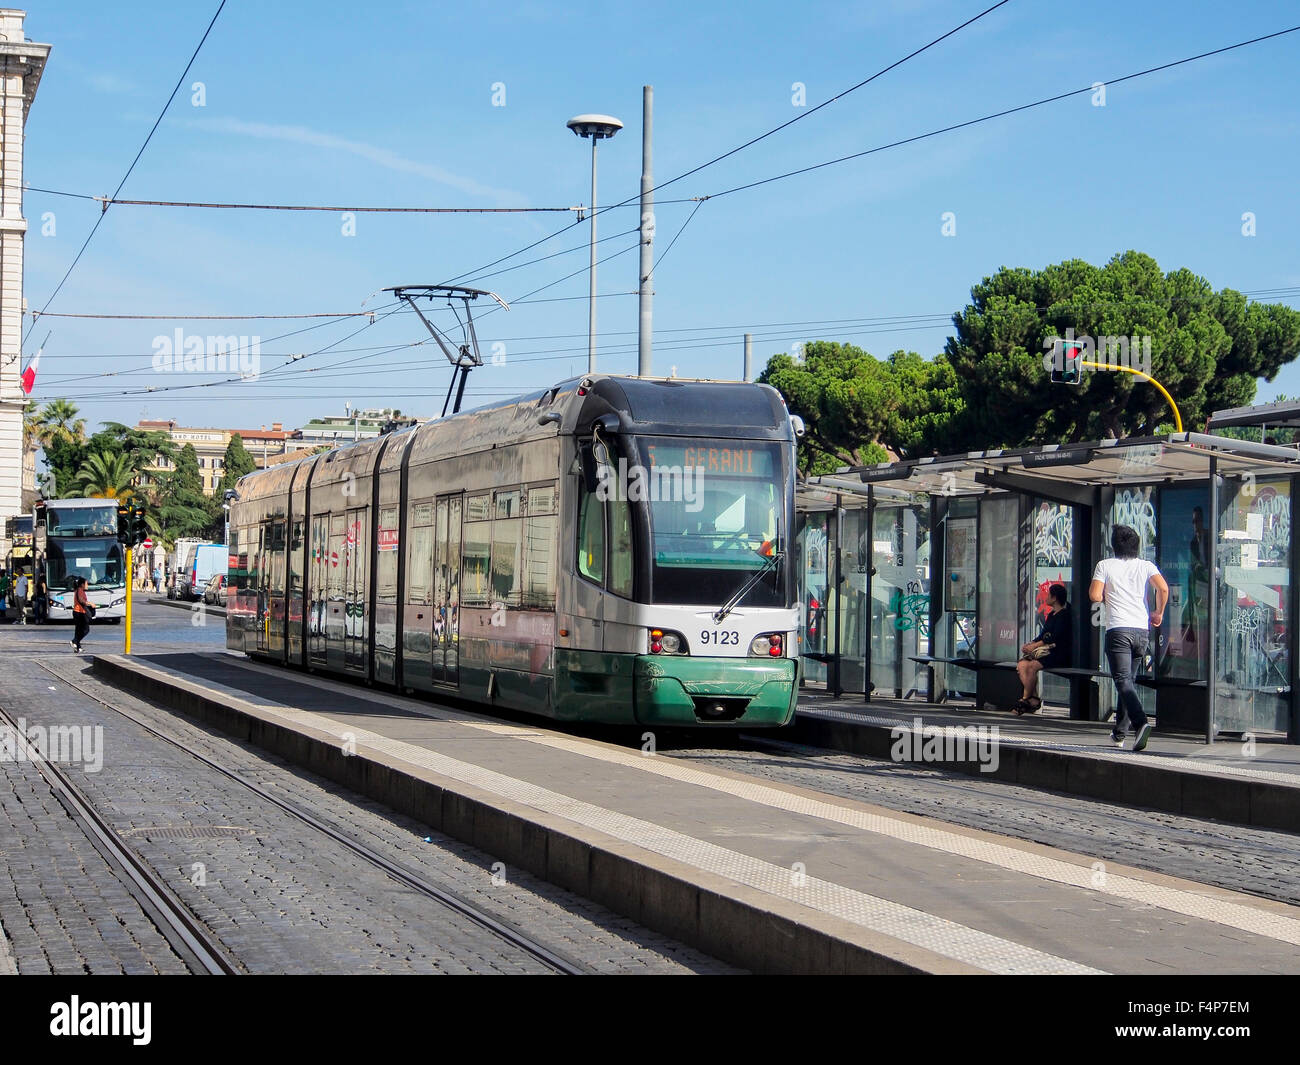 A Route 6 Tram in Rome Stock Photo